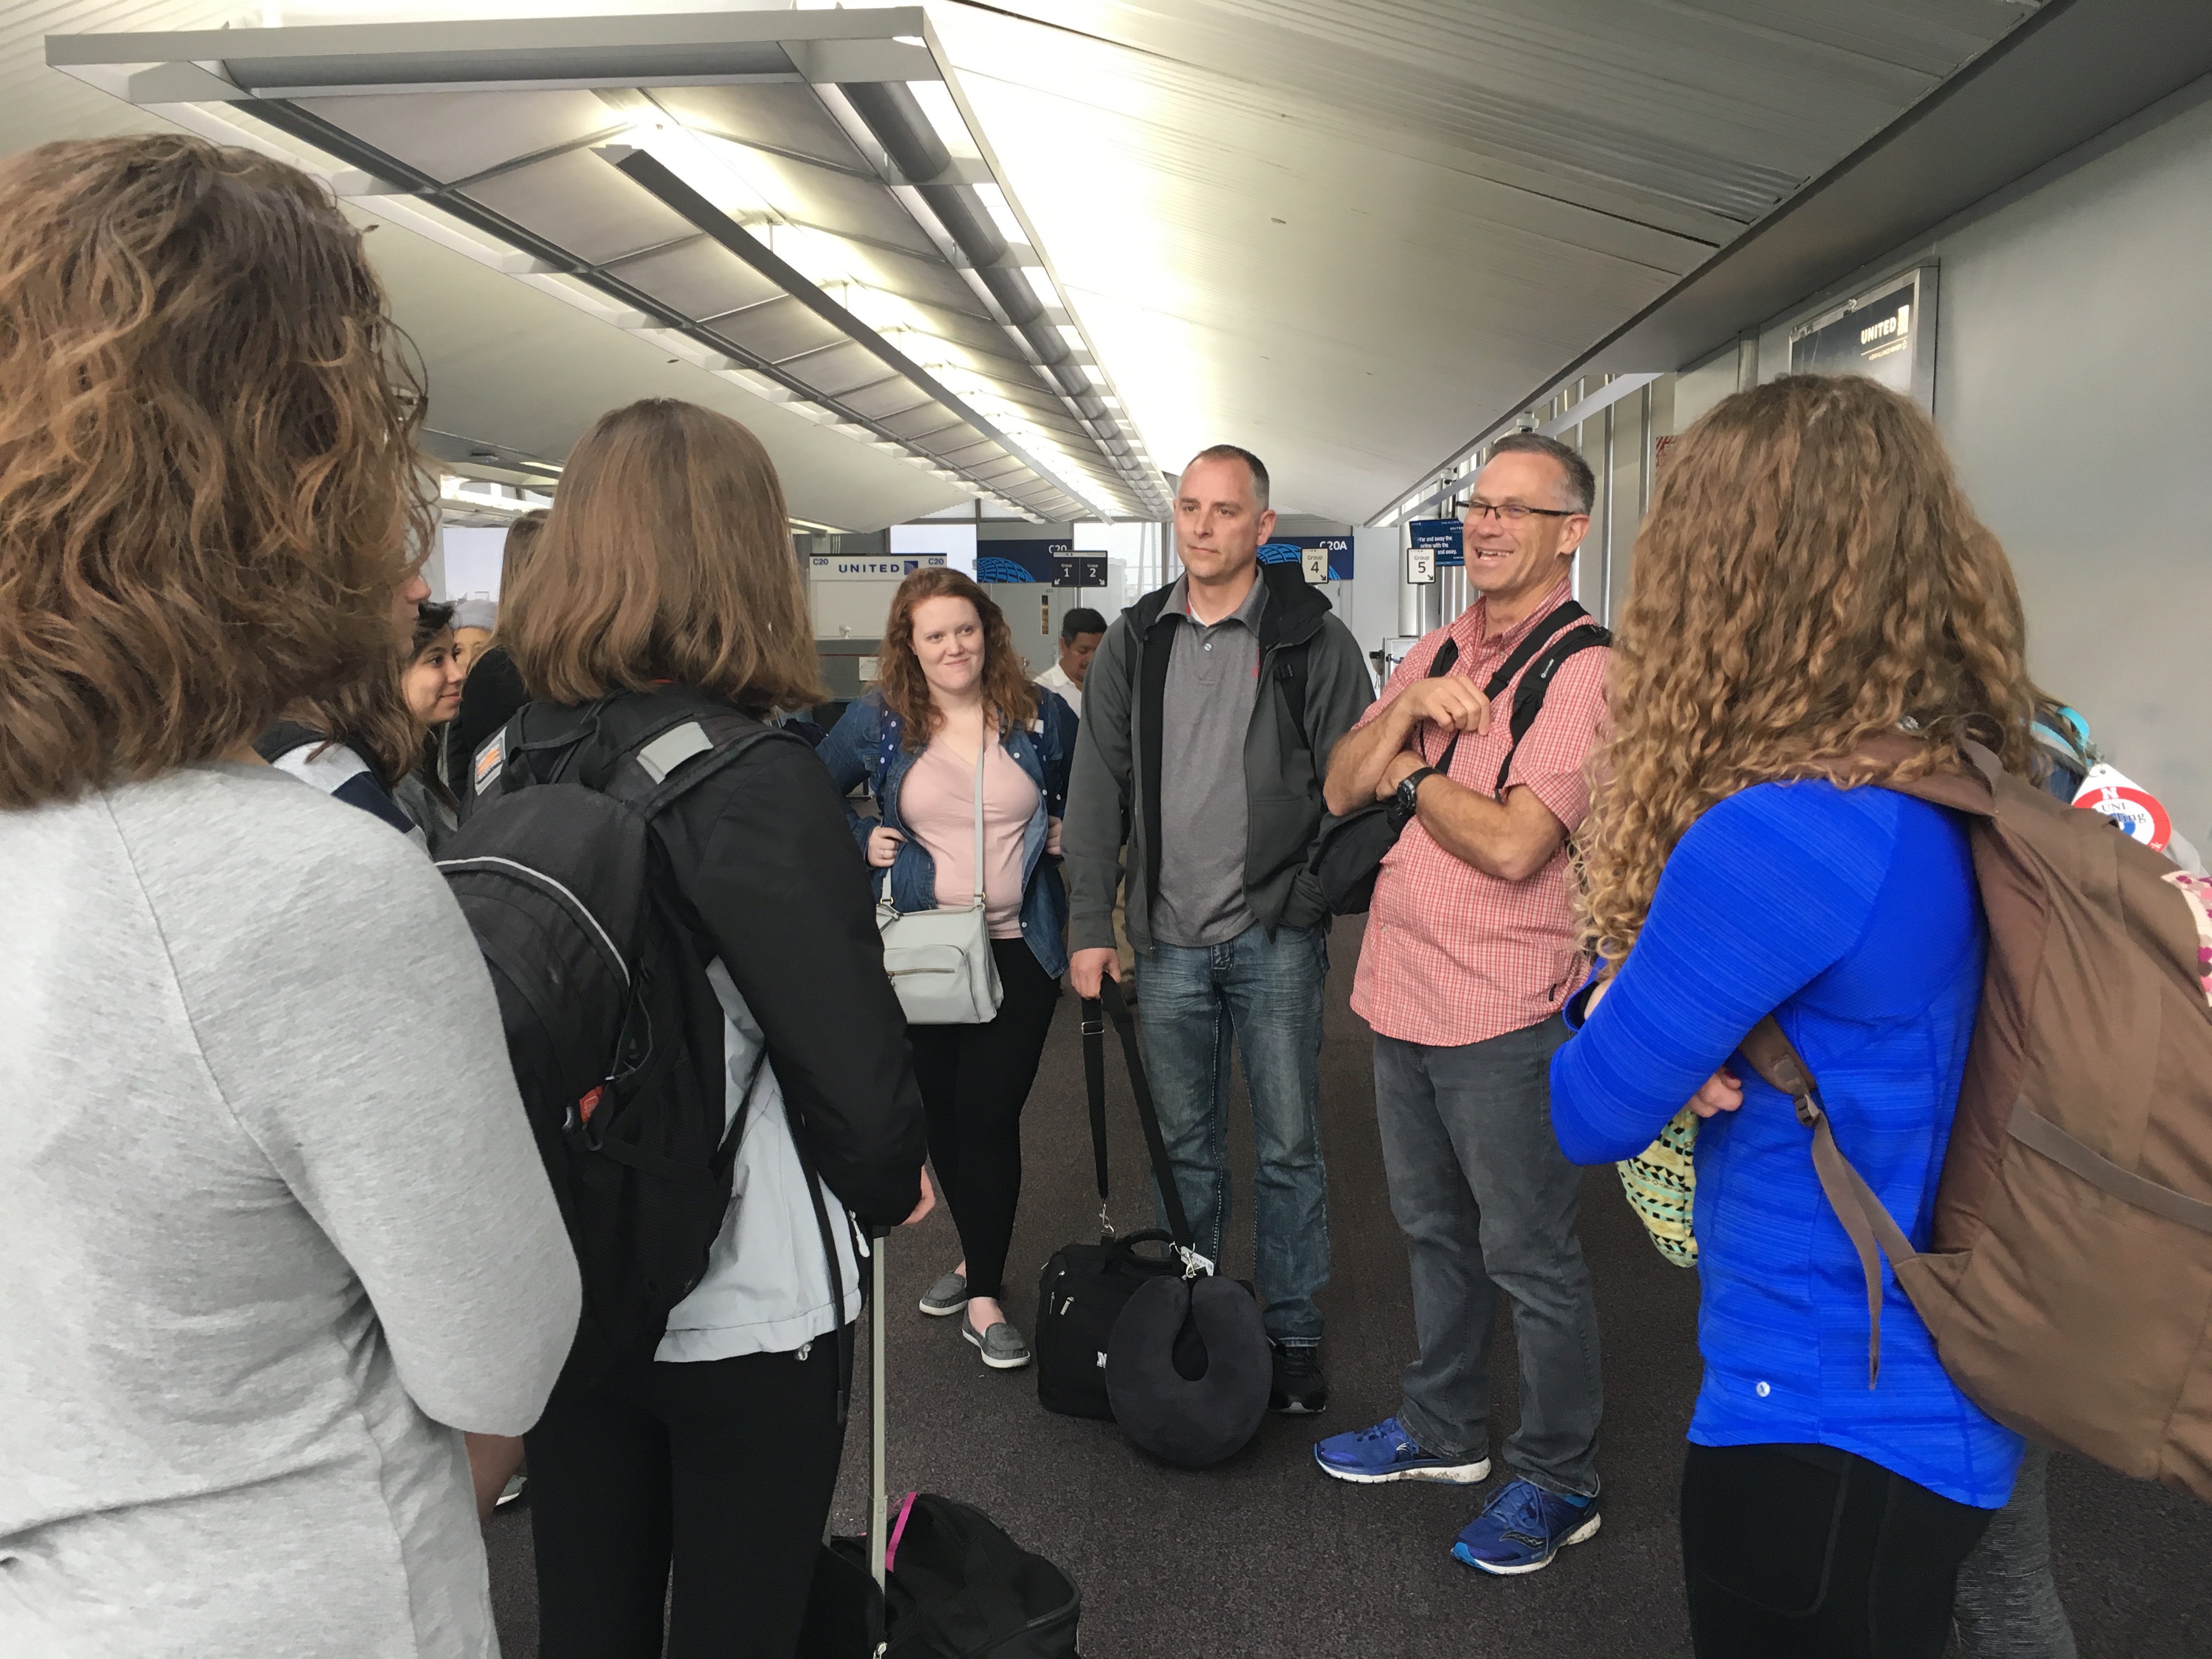 At their first stop in Chicago, Rich Bischoff (right) and Paul Springer (center) visit with students on the CYAF education abroad trip to China.